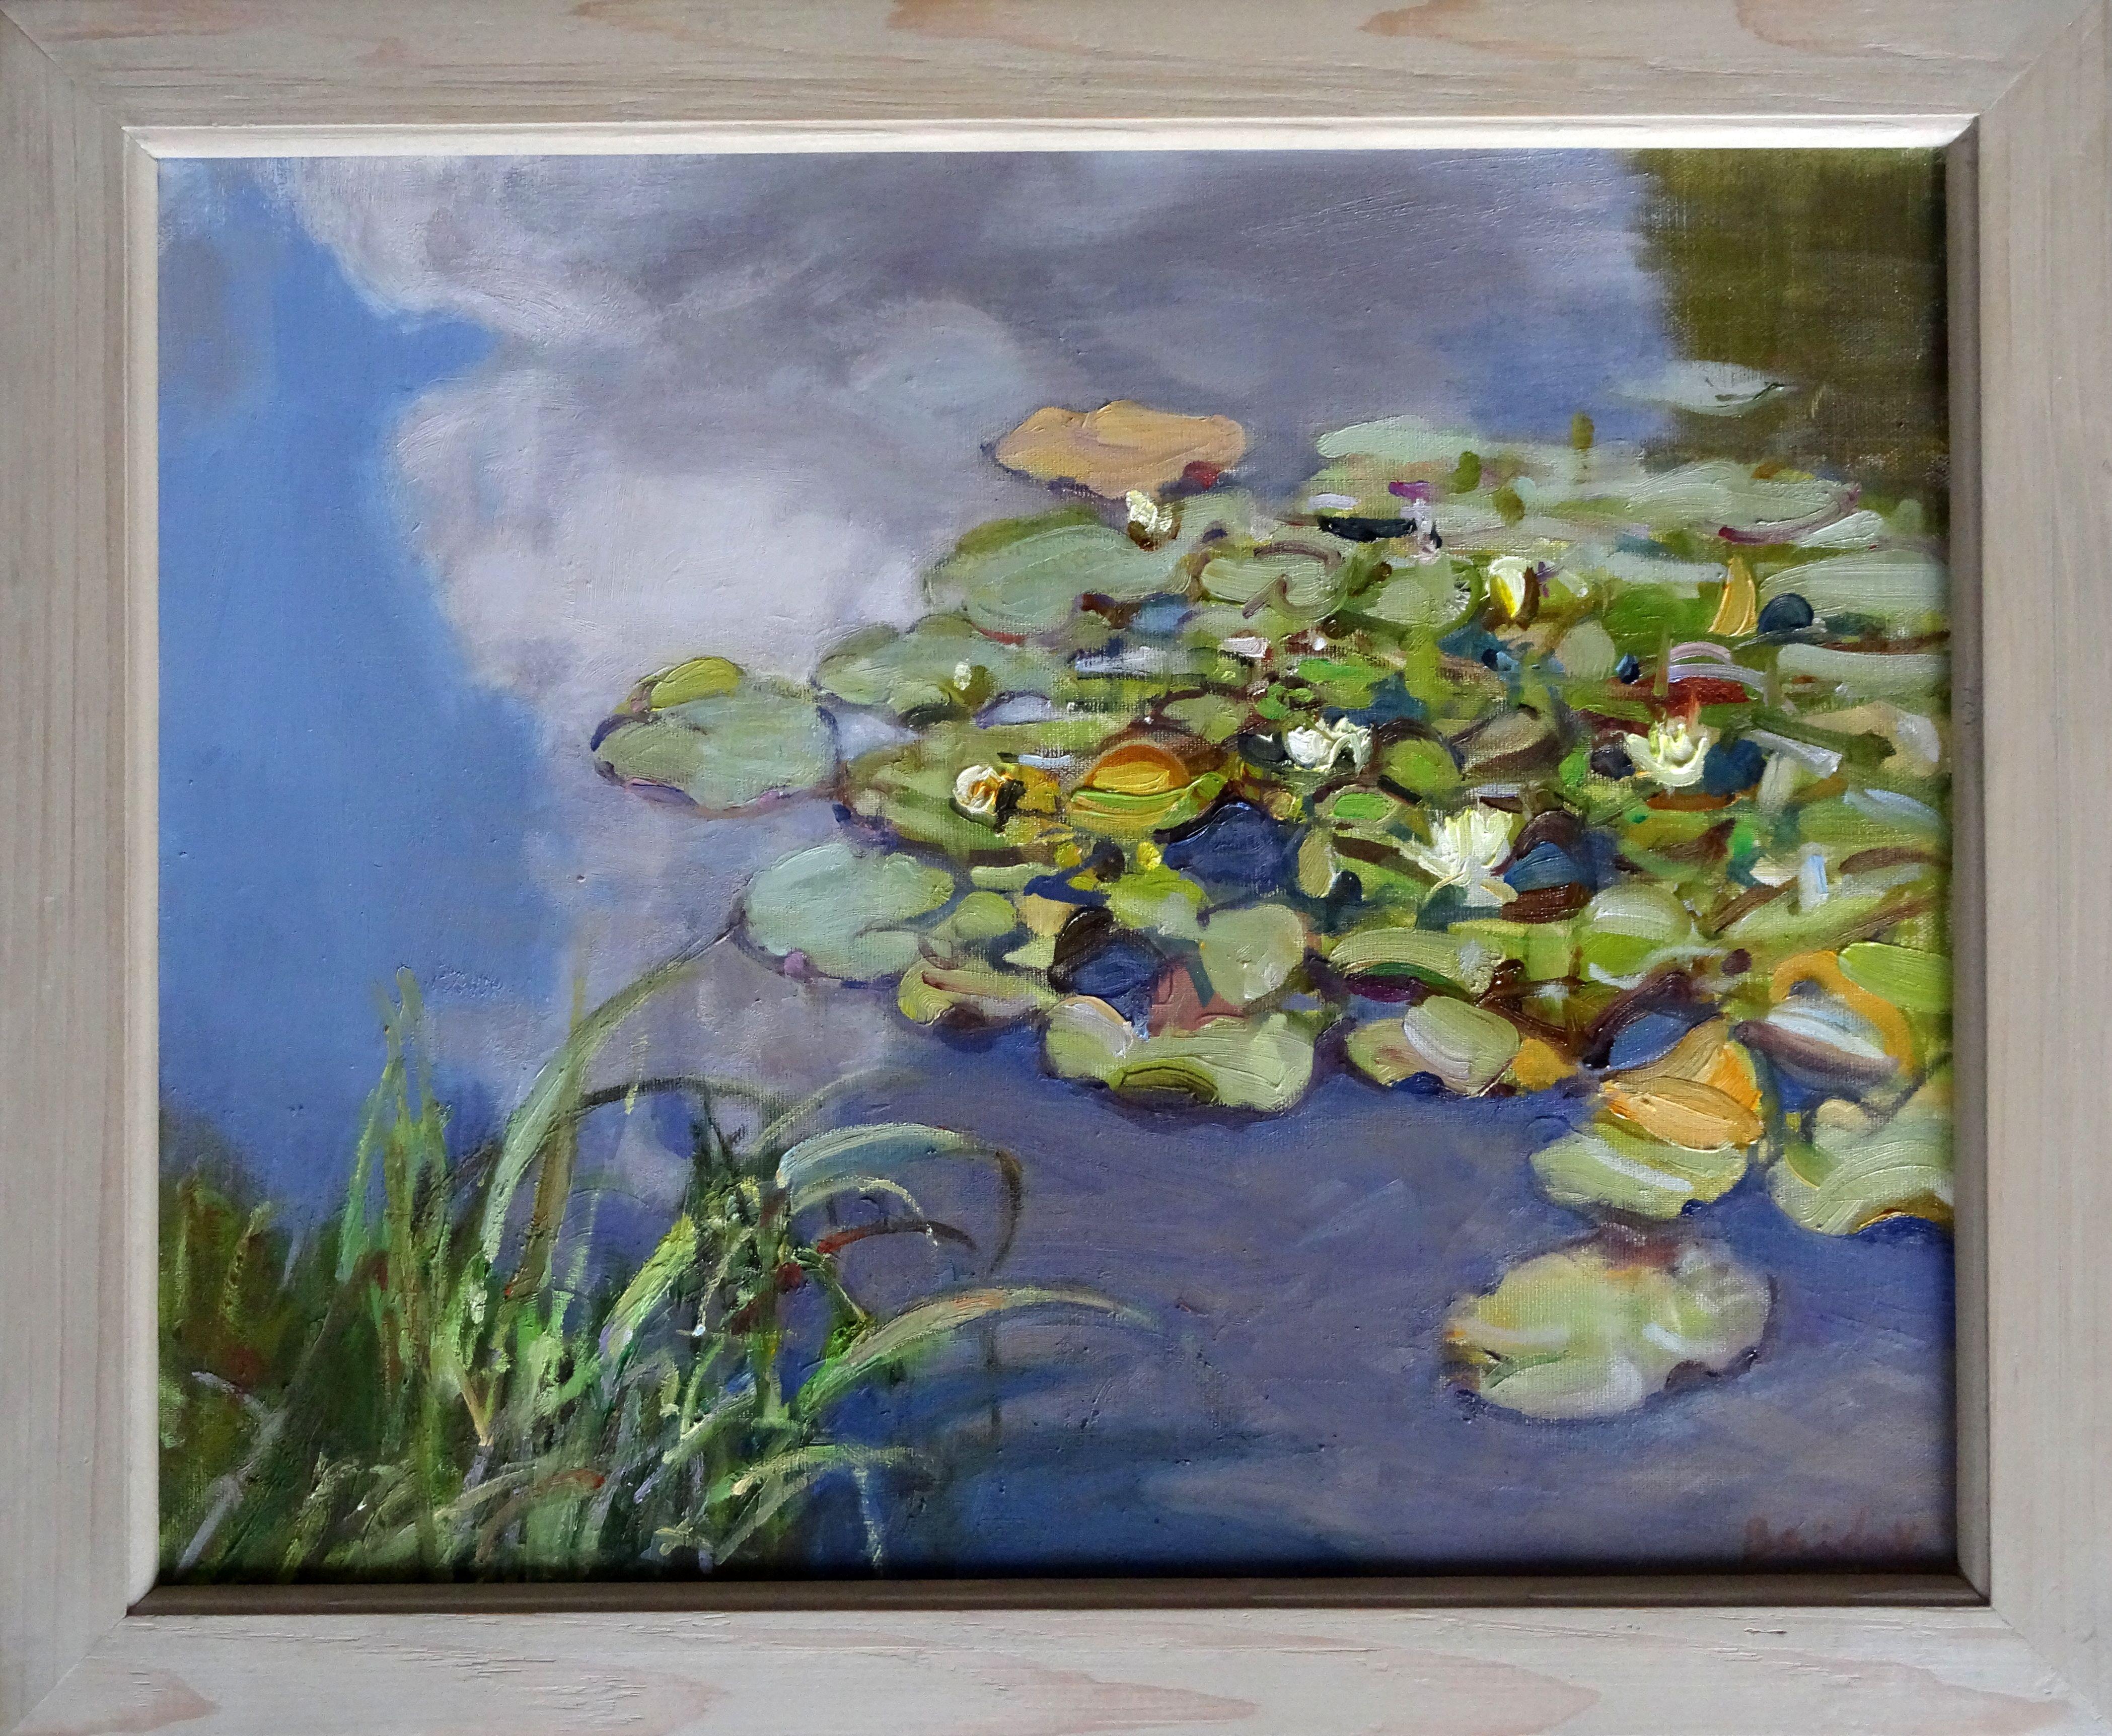 After the rain. Water lilies. 2018, oil on canvas, 40x50 cm - Painting by Valery Bayda 